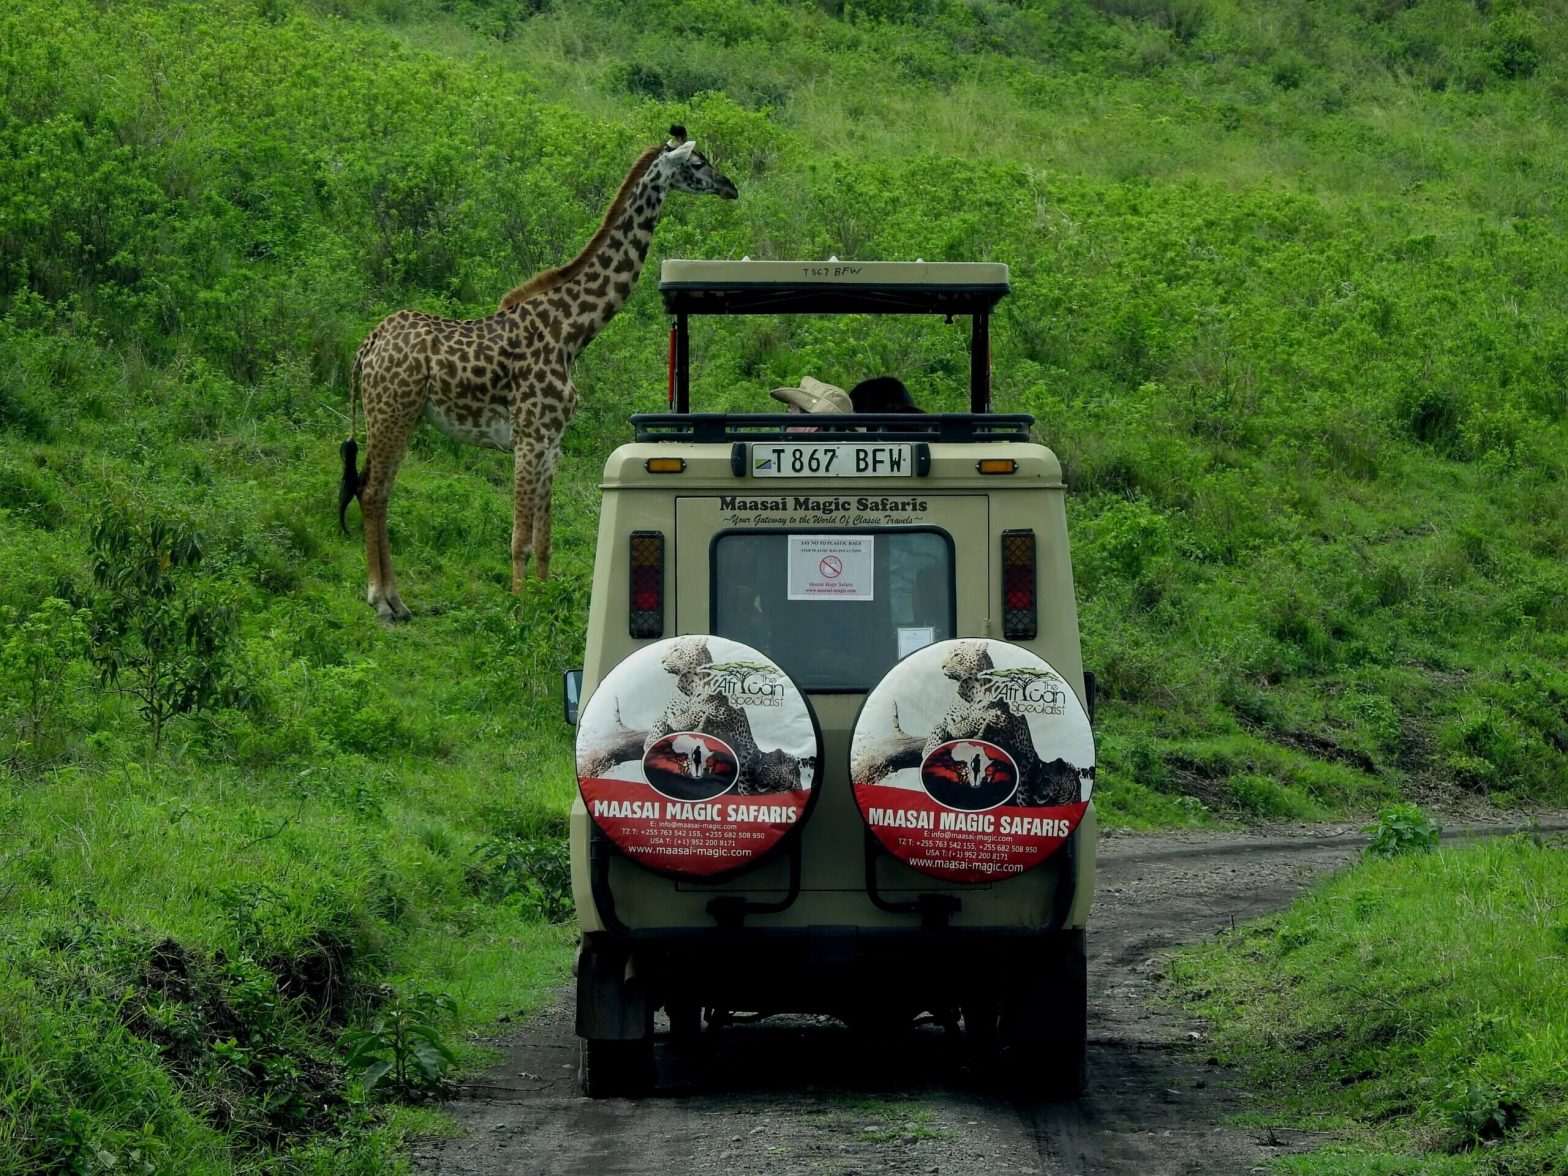 Giraffe in front of vehicle